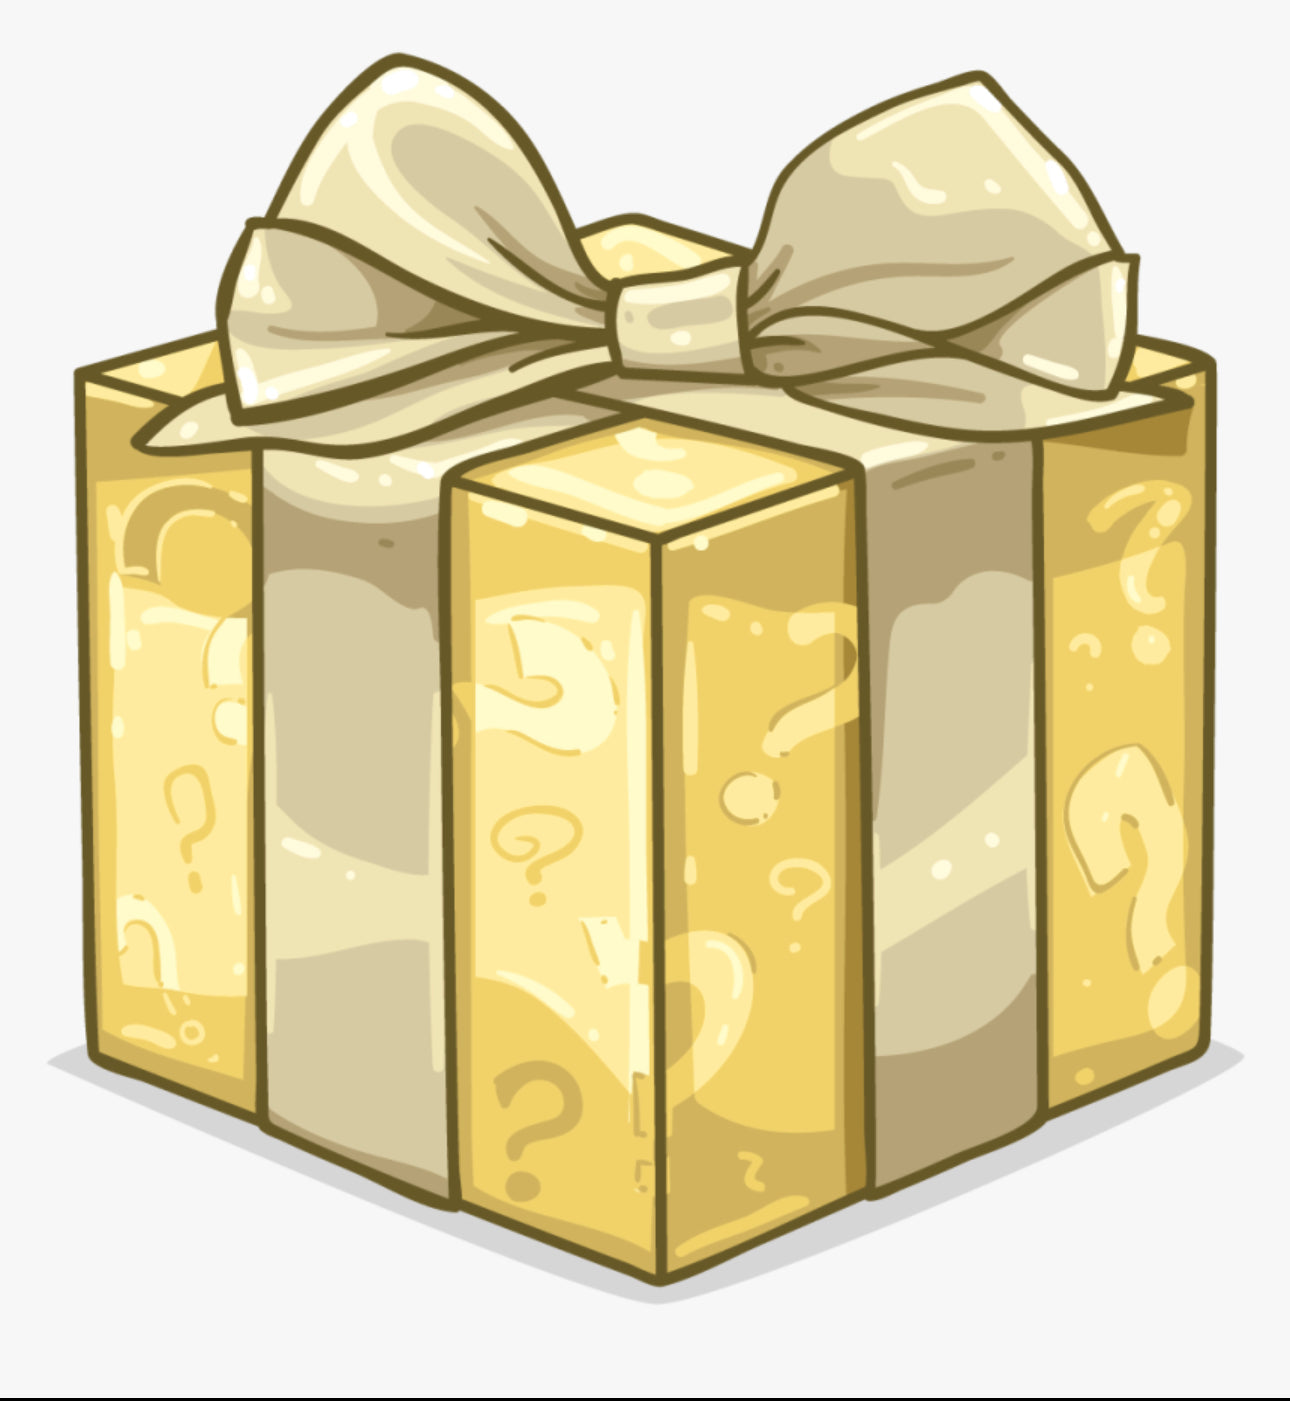 FREE PROMO ONE DAY SPECIAL - MYSTERY BOX - EXCLUSIVE! WORTH $100!